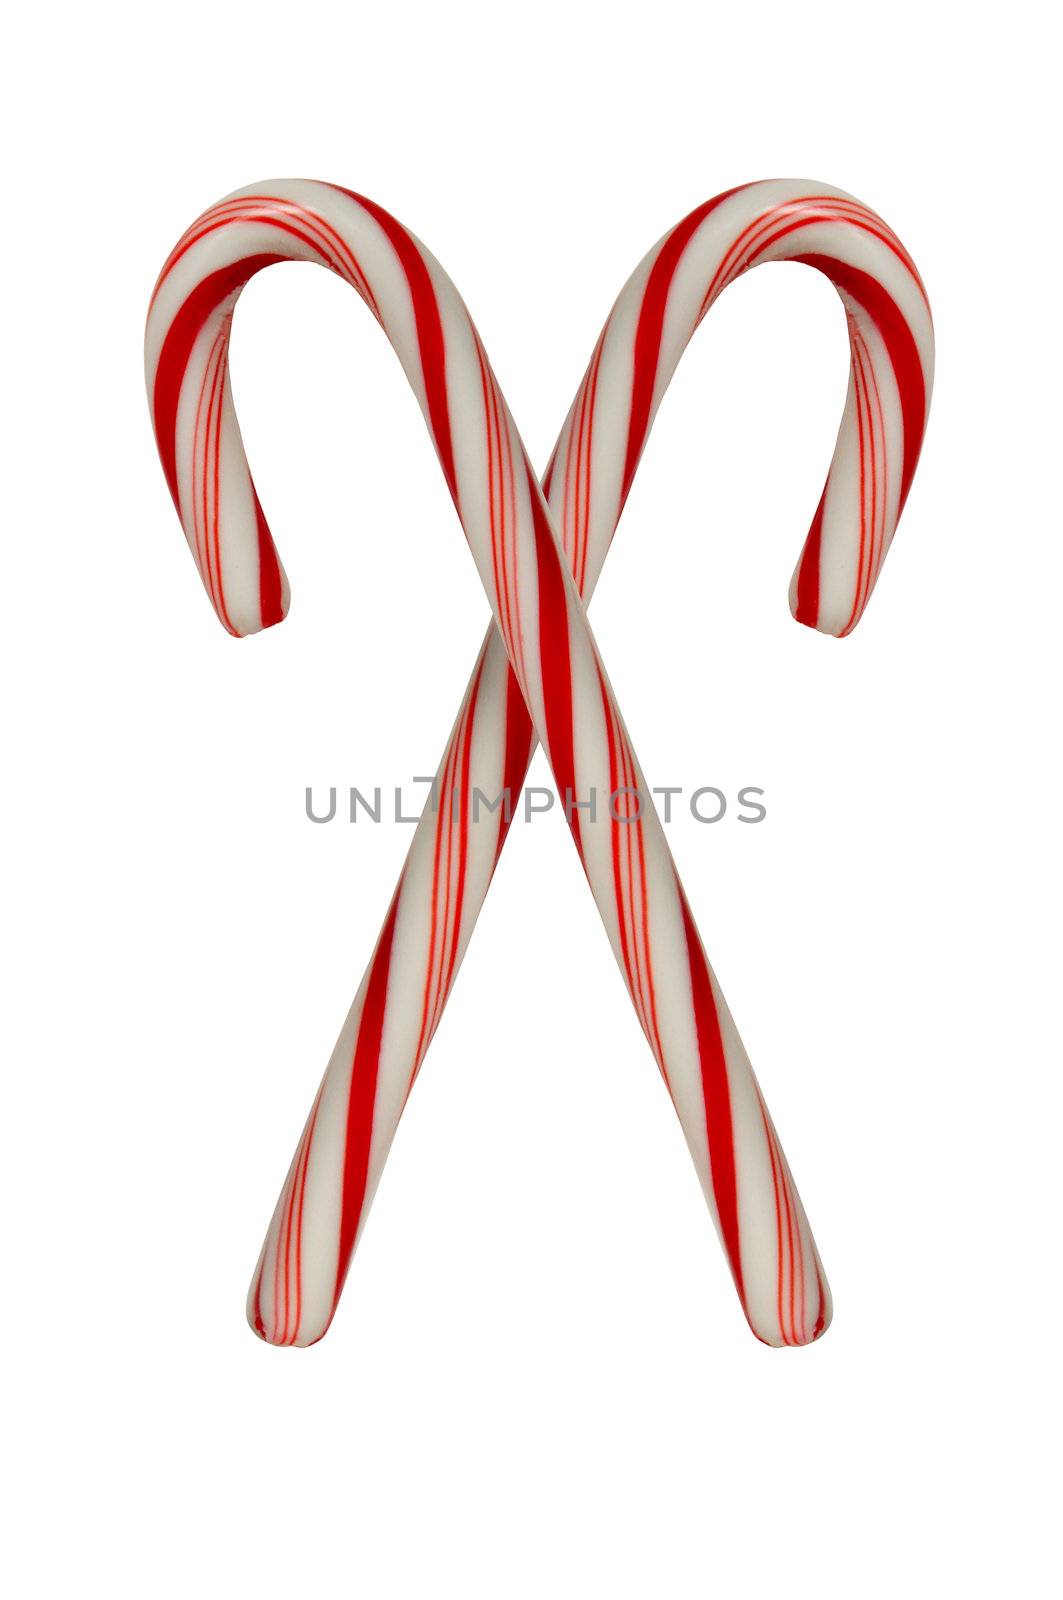 Two crossed candy canes on white background